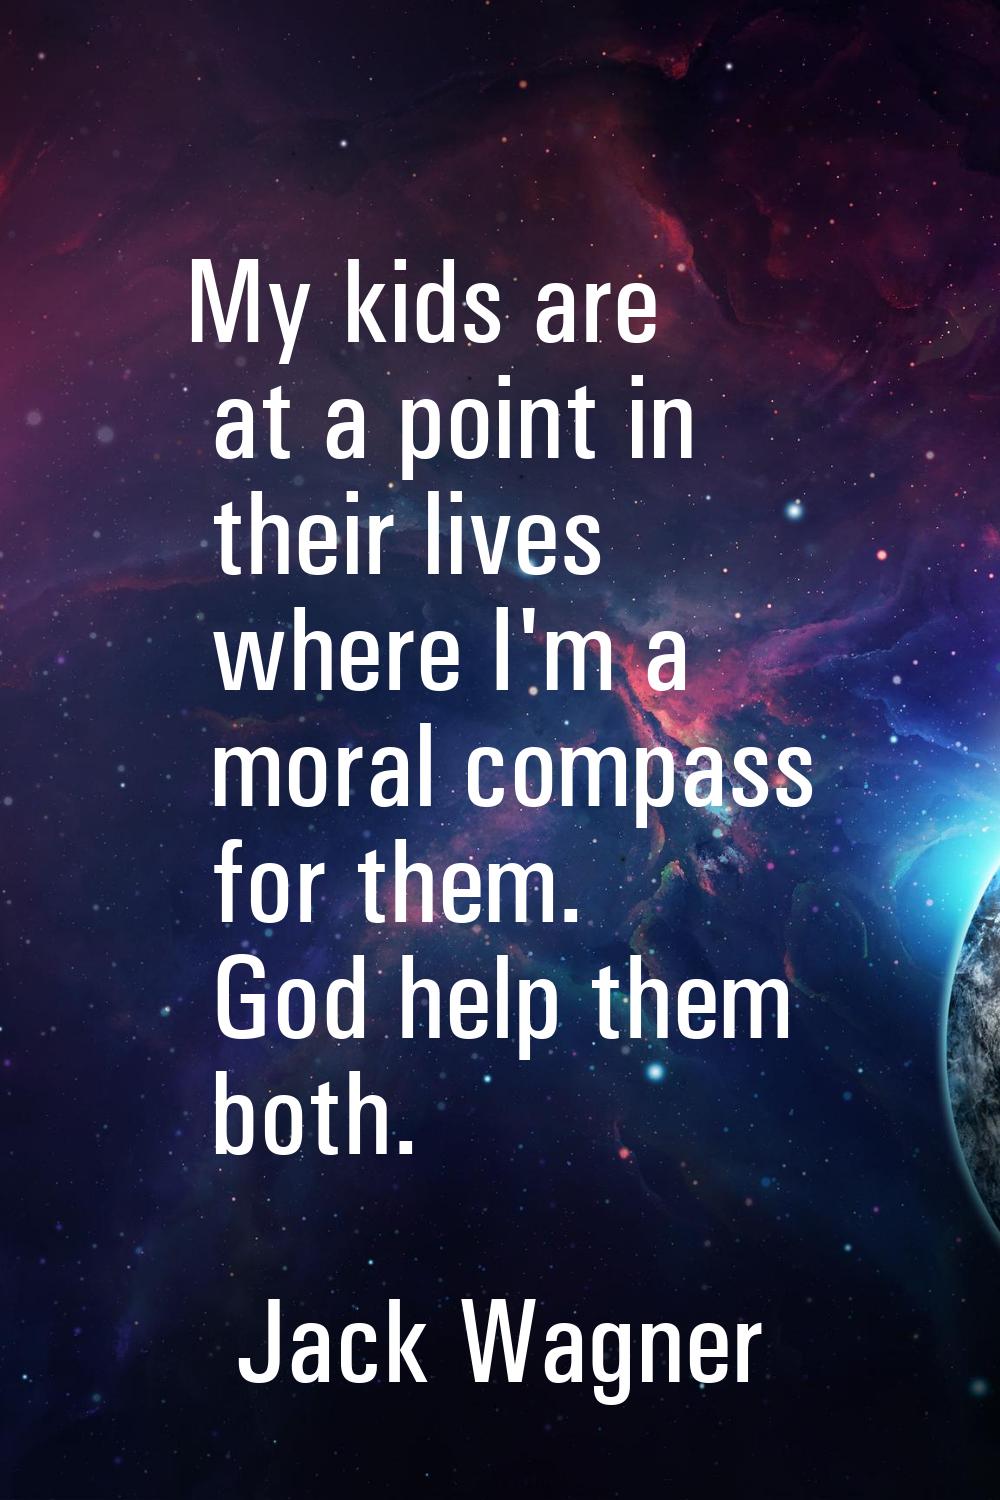 My kids are at a point in their lives where I'm a moral compass for them. God help them both.